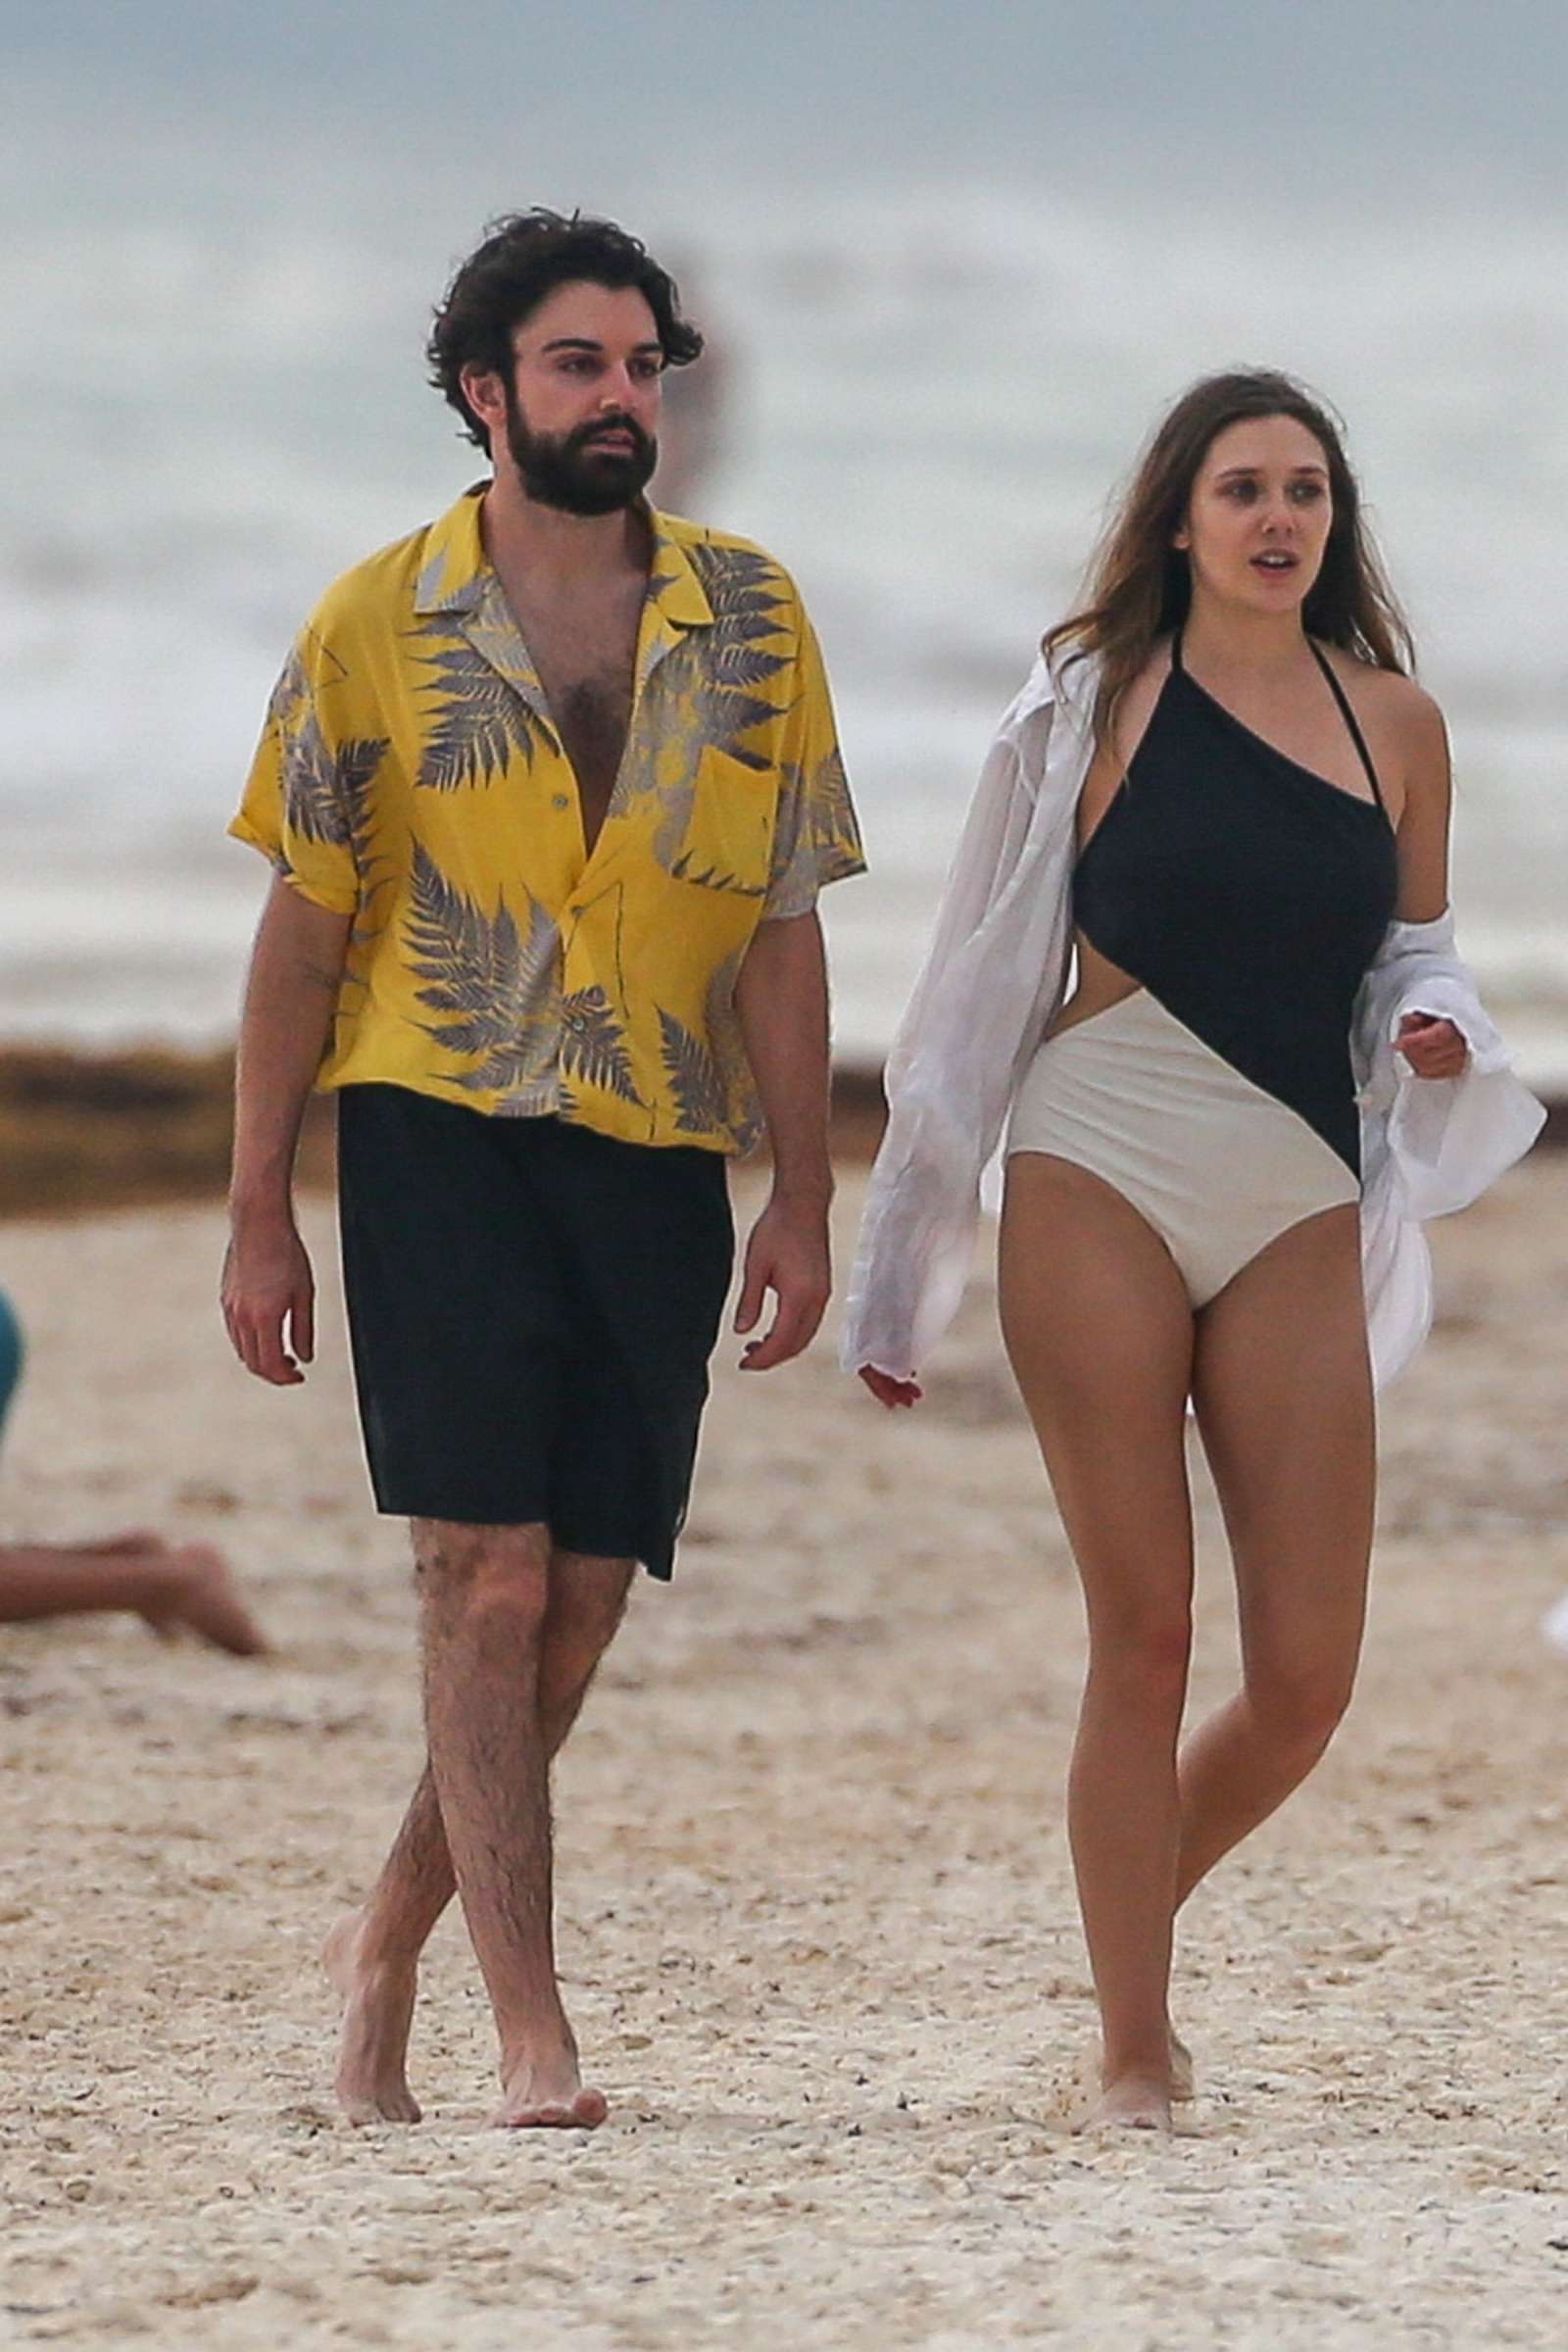 Elizabeth Olsen in Black and White Swimsuit at a beach in Mexico